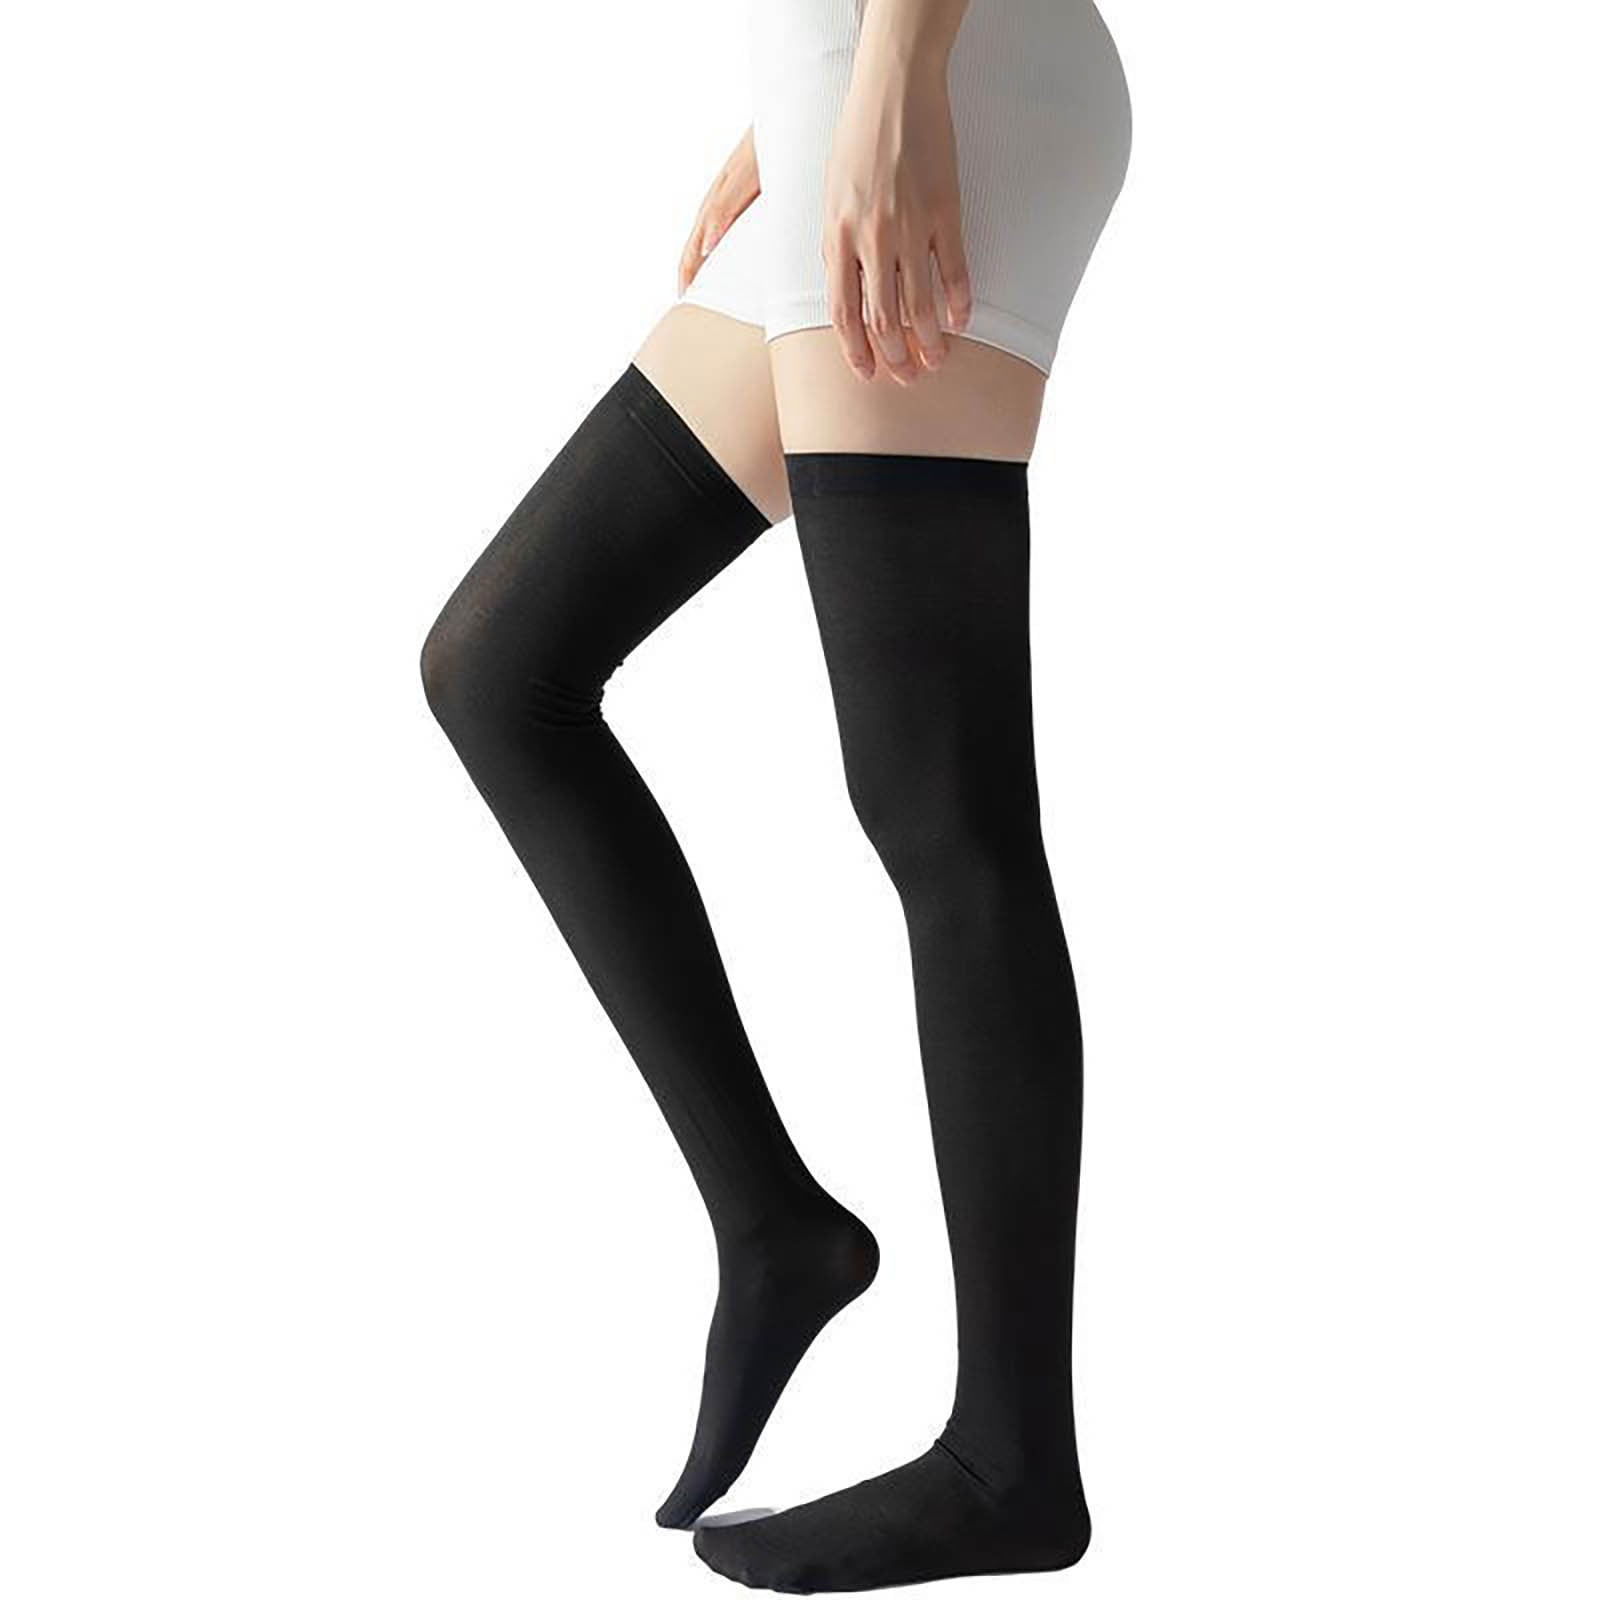 Ribbon Factory Store XXXL Shiny Underwear With Thigh High Shears And  Plastic Black Thigh High Socks Perfect For Polar Dance Club And Party Wear  50% Discount! From Footwearfactory10, $10.09